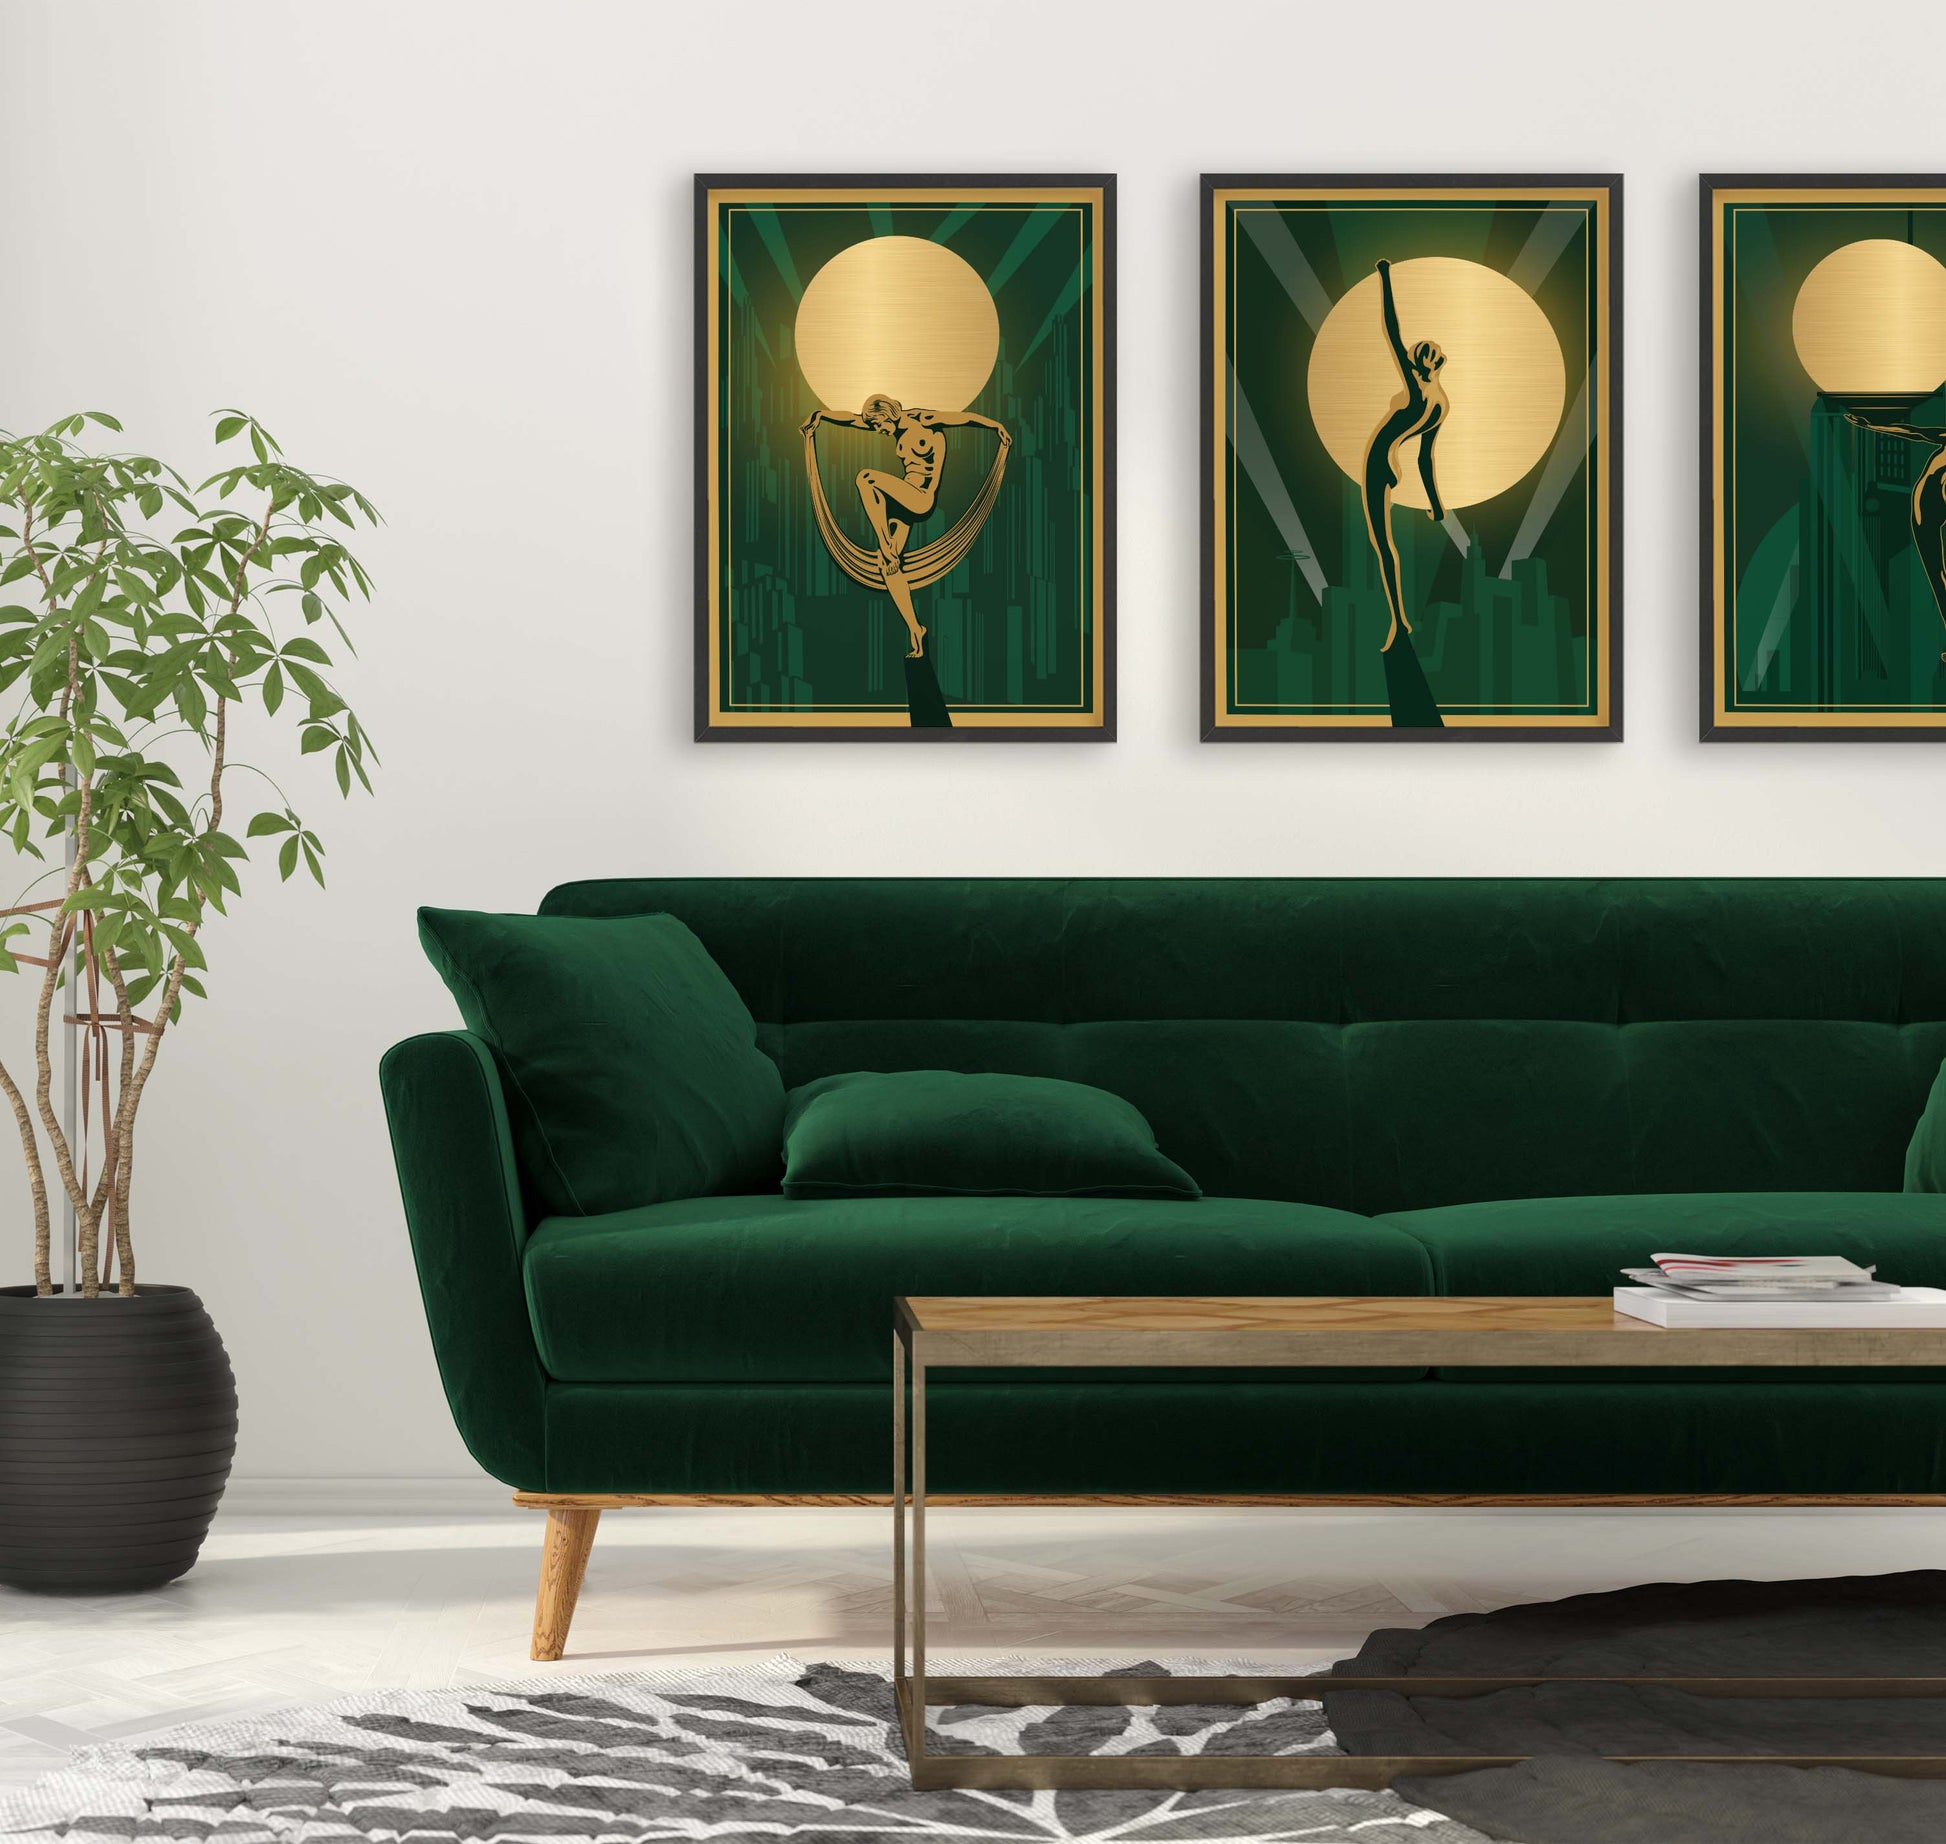 Set of 3 art deco prints in green and gold